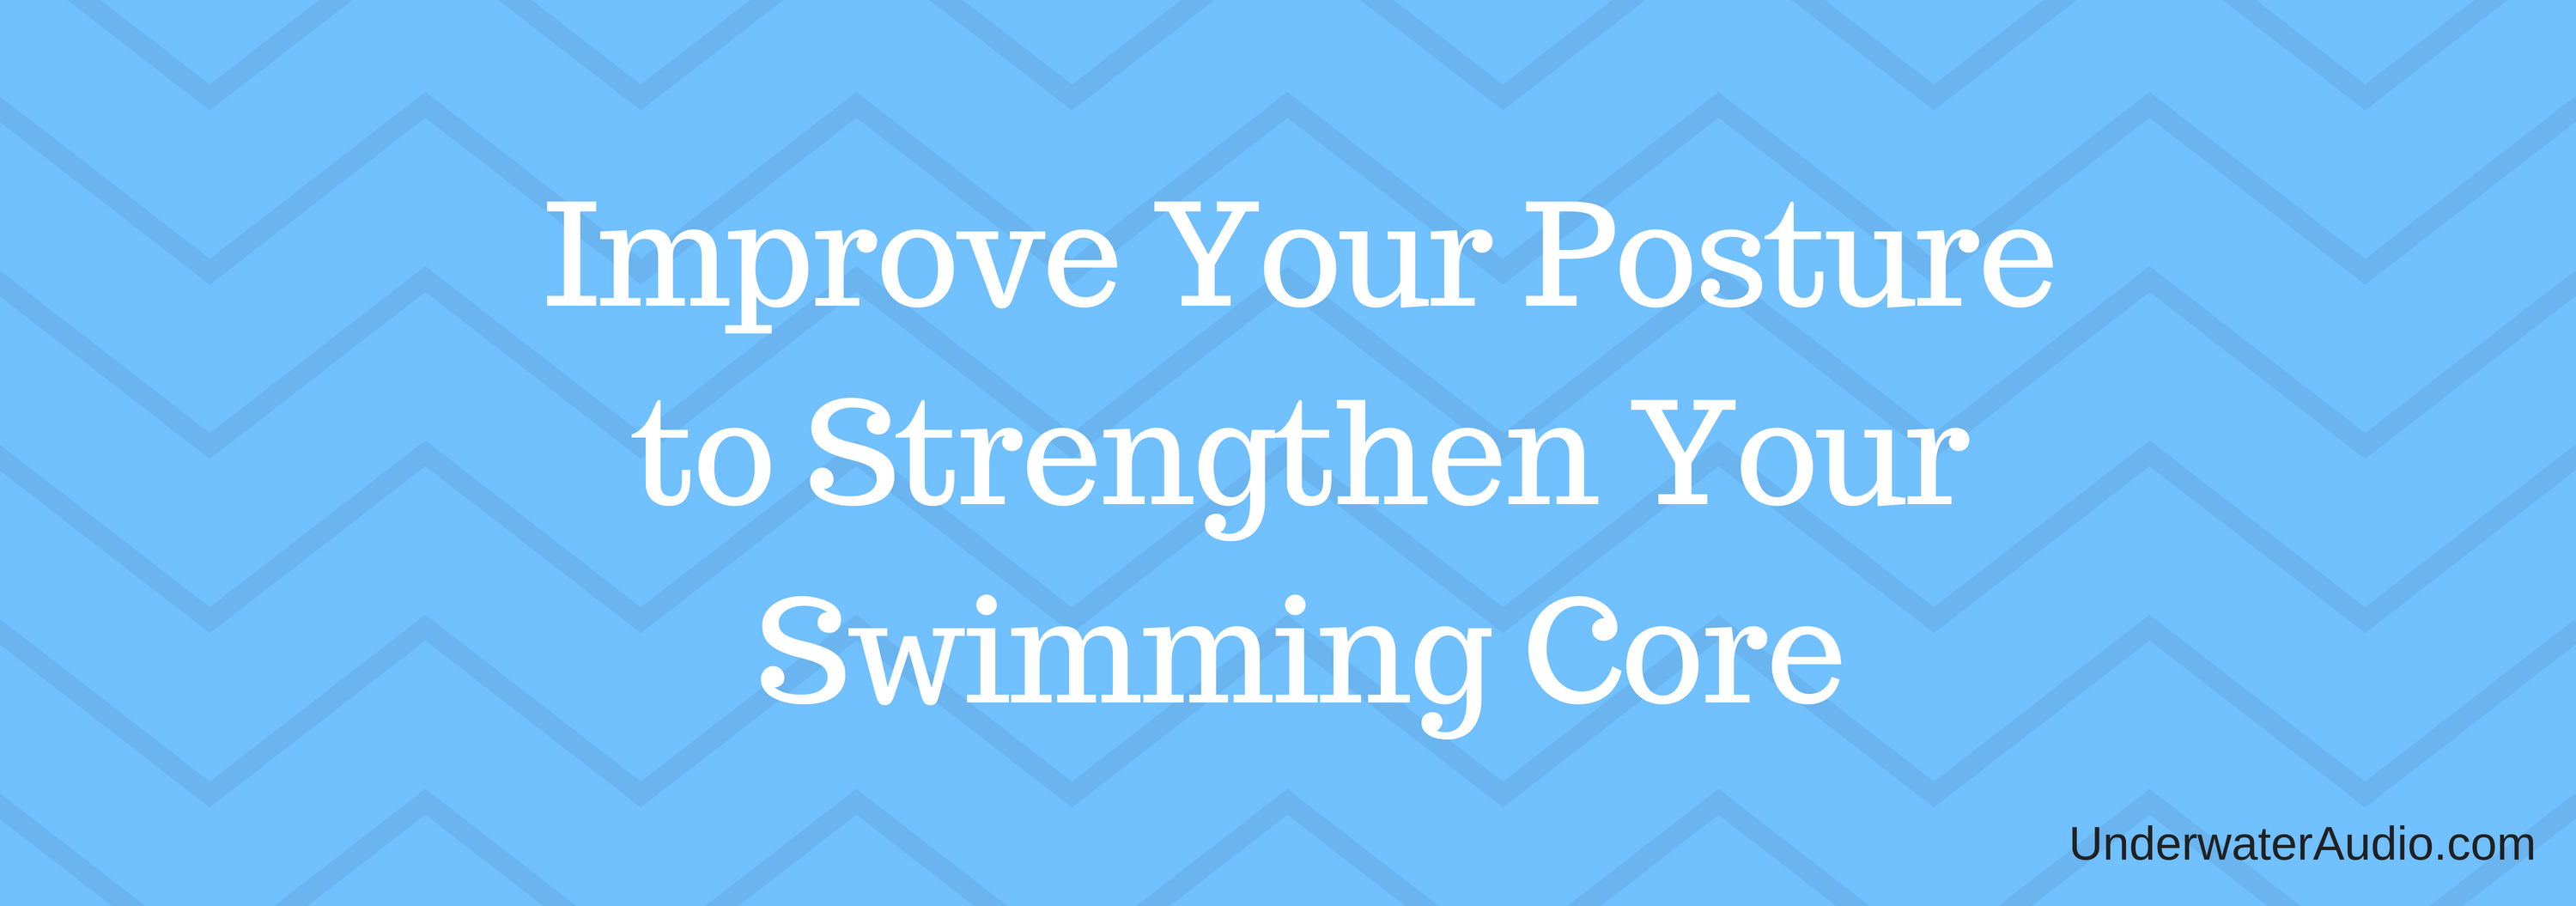 Improve Your Posture to Strengthen Your Swimming Core